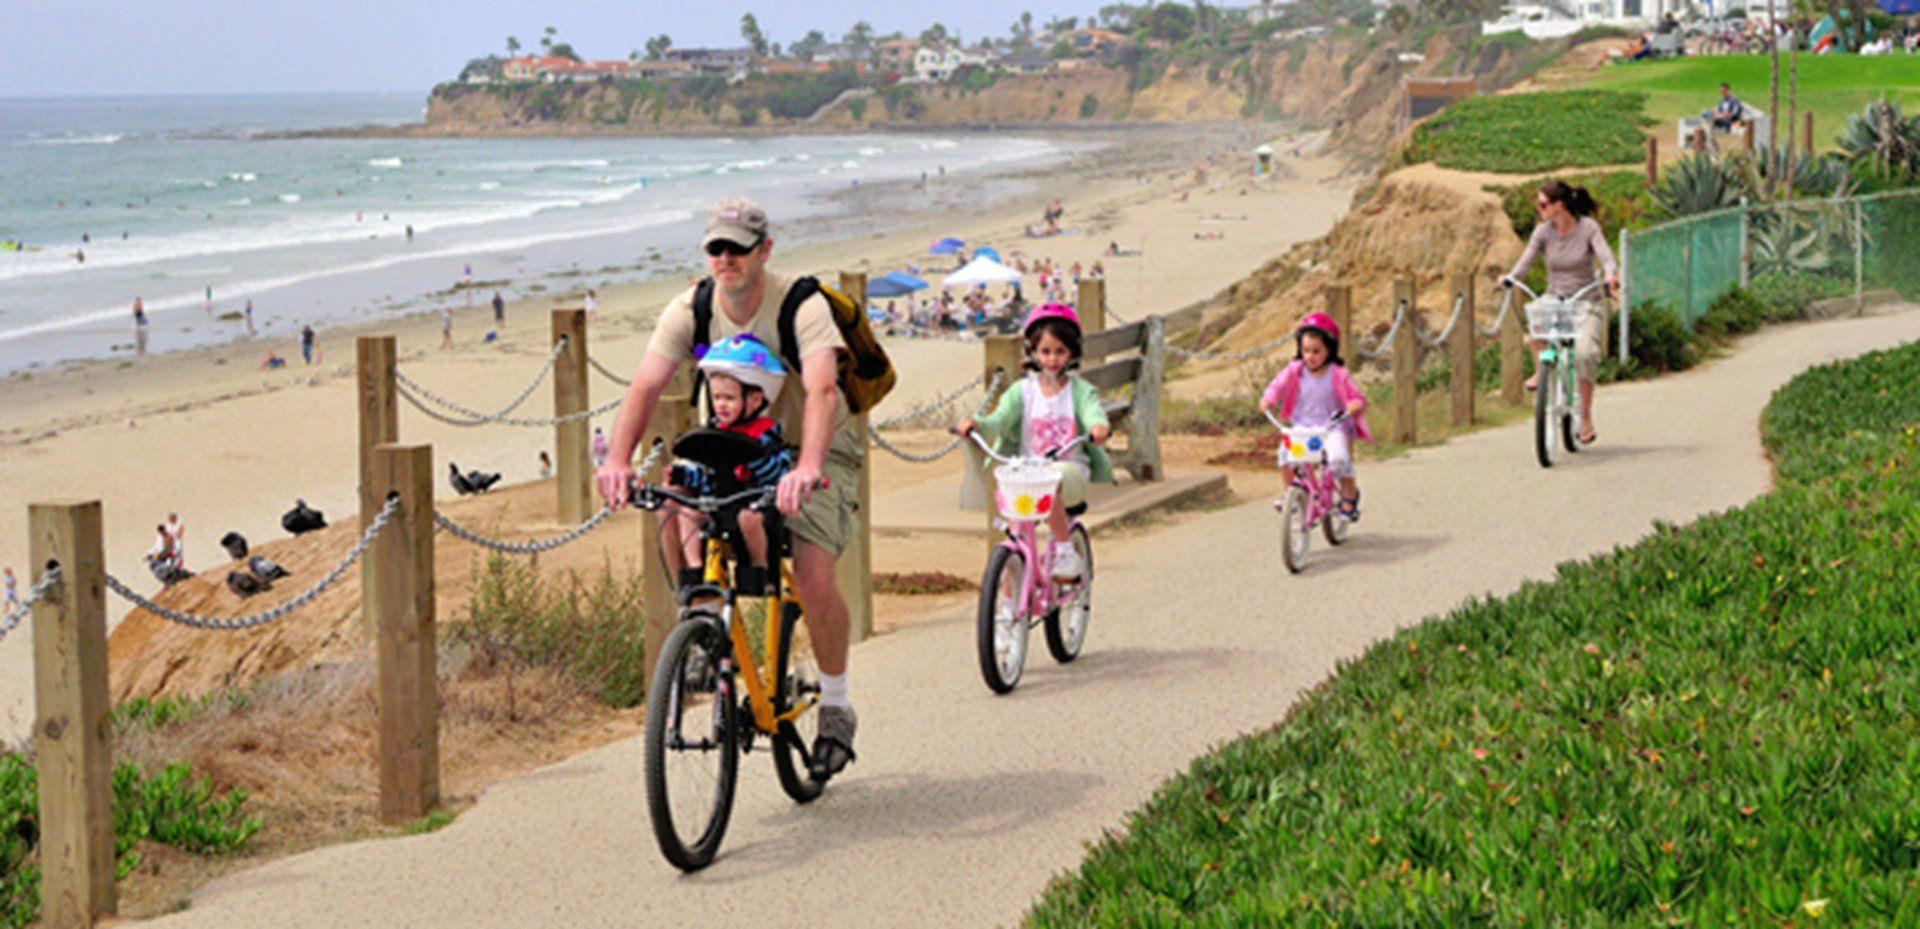 a group of people are riding bikes on a path near the beach .